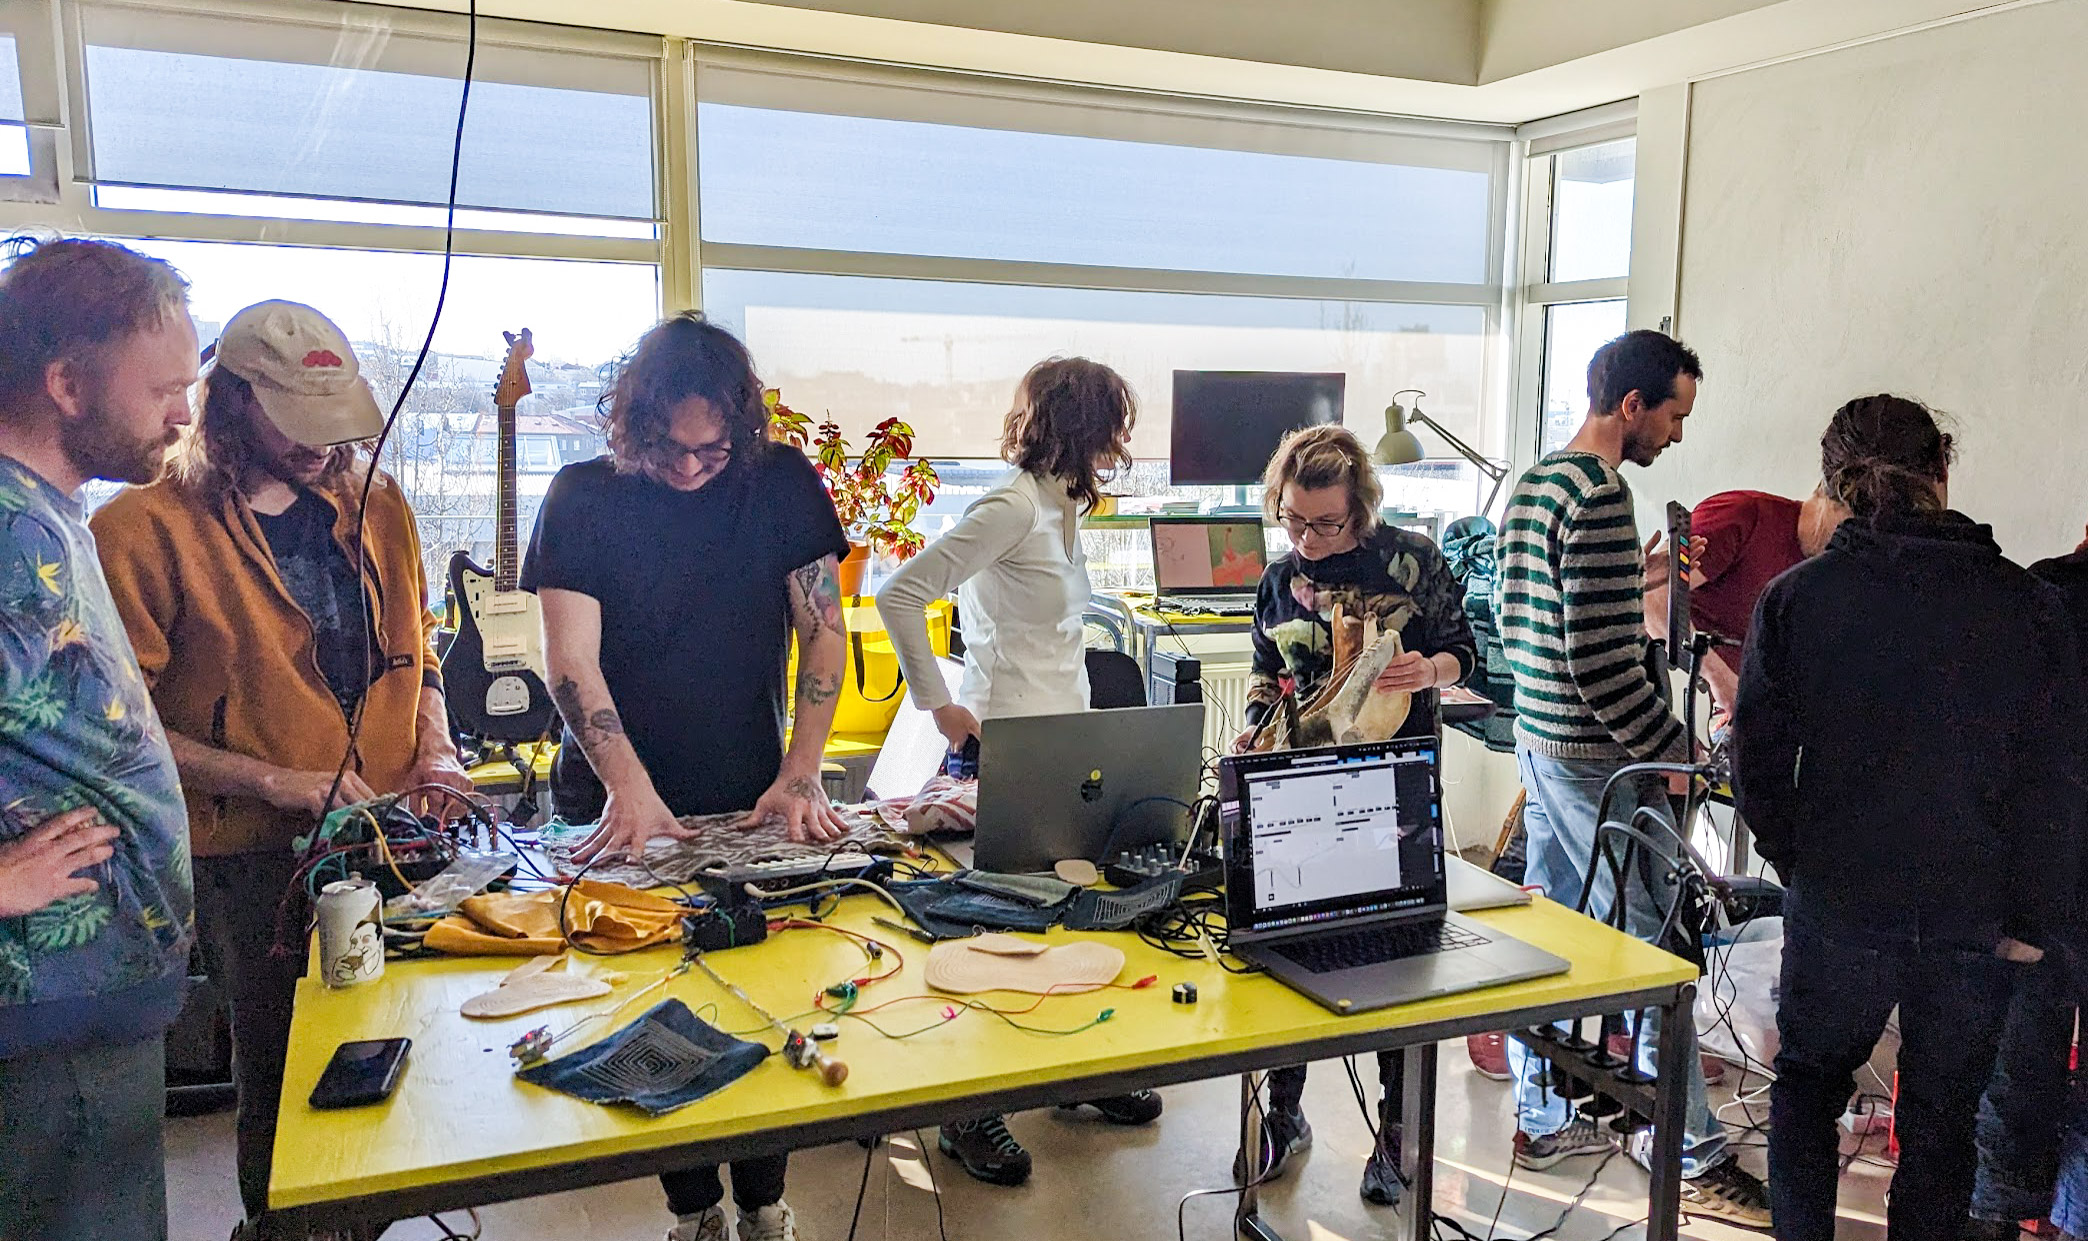 People surrounding a yellow table with loads of odd instruments